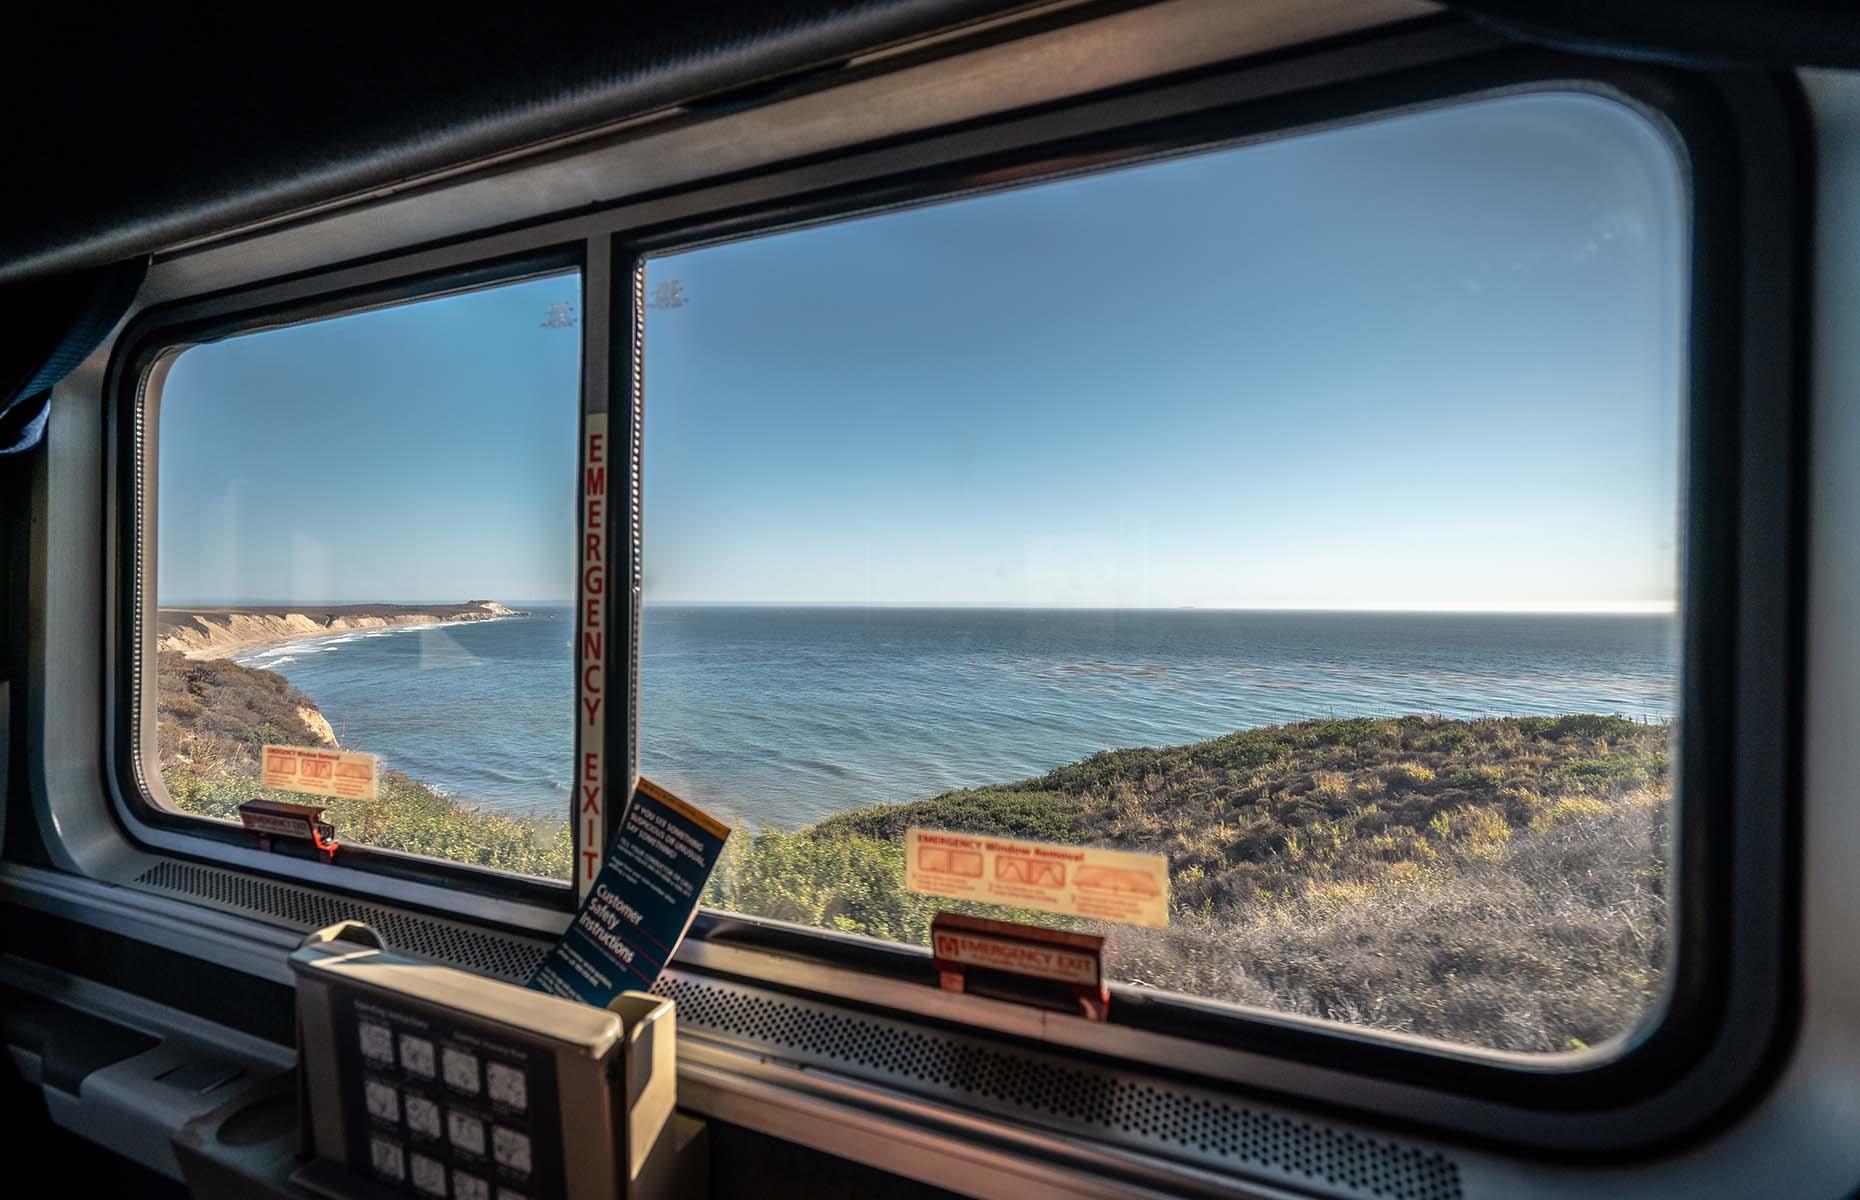 The train typically departs three times a week and is grouped among the most spectacular train routes in America. As with all long-distance Amtrak trains, there's a wide range of accommodation available, as well as the Sightseer Lounge to soak in those sparkling views of the Pacific shoreline.